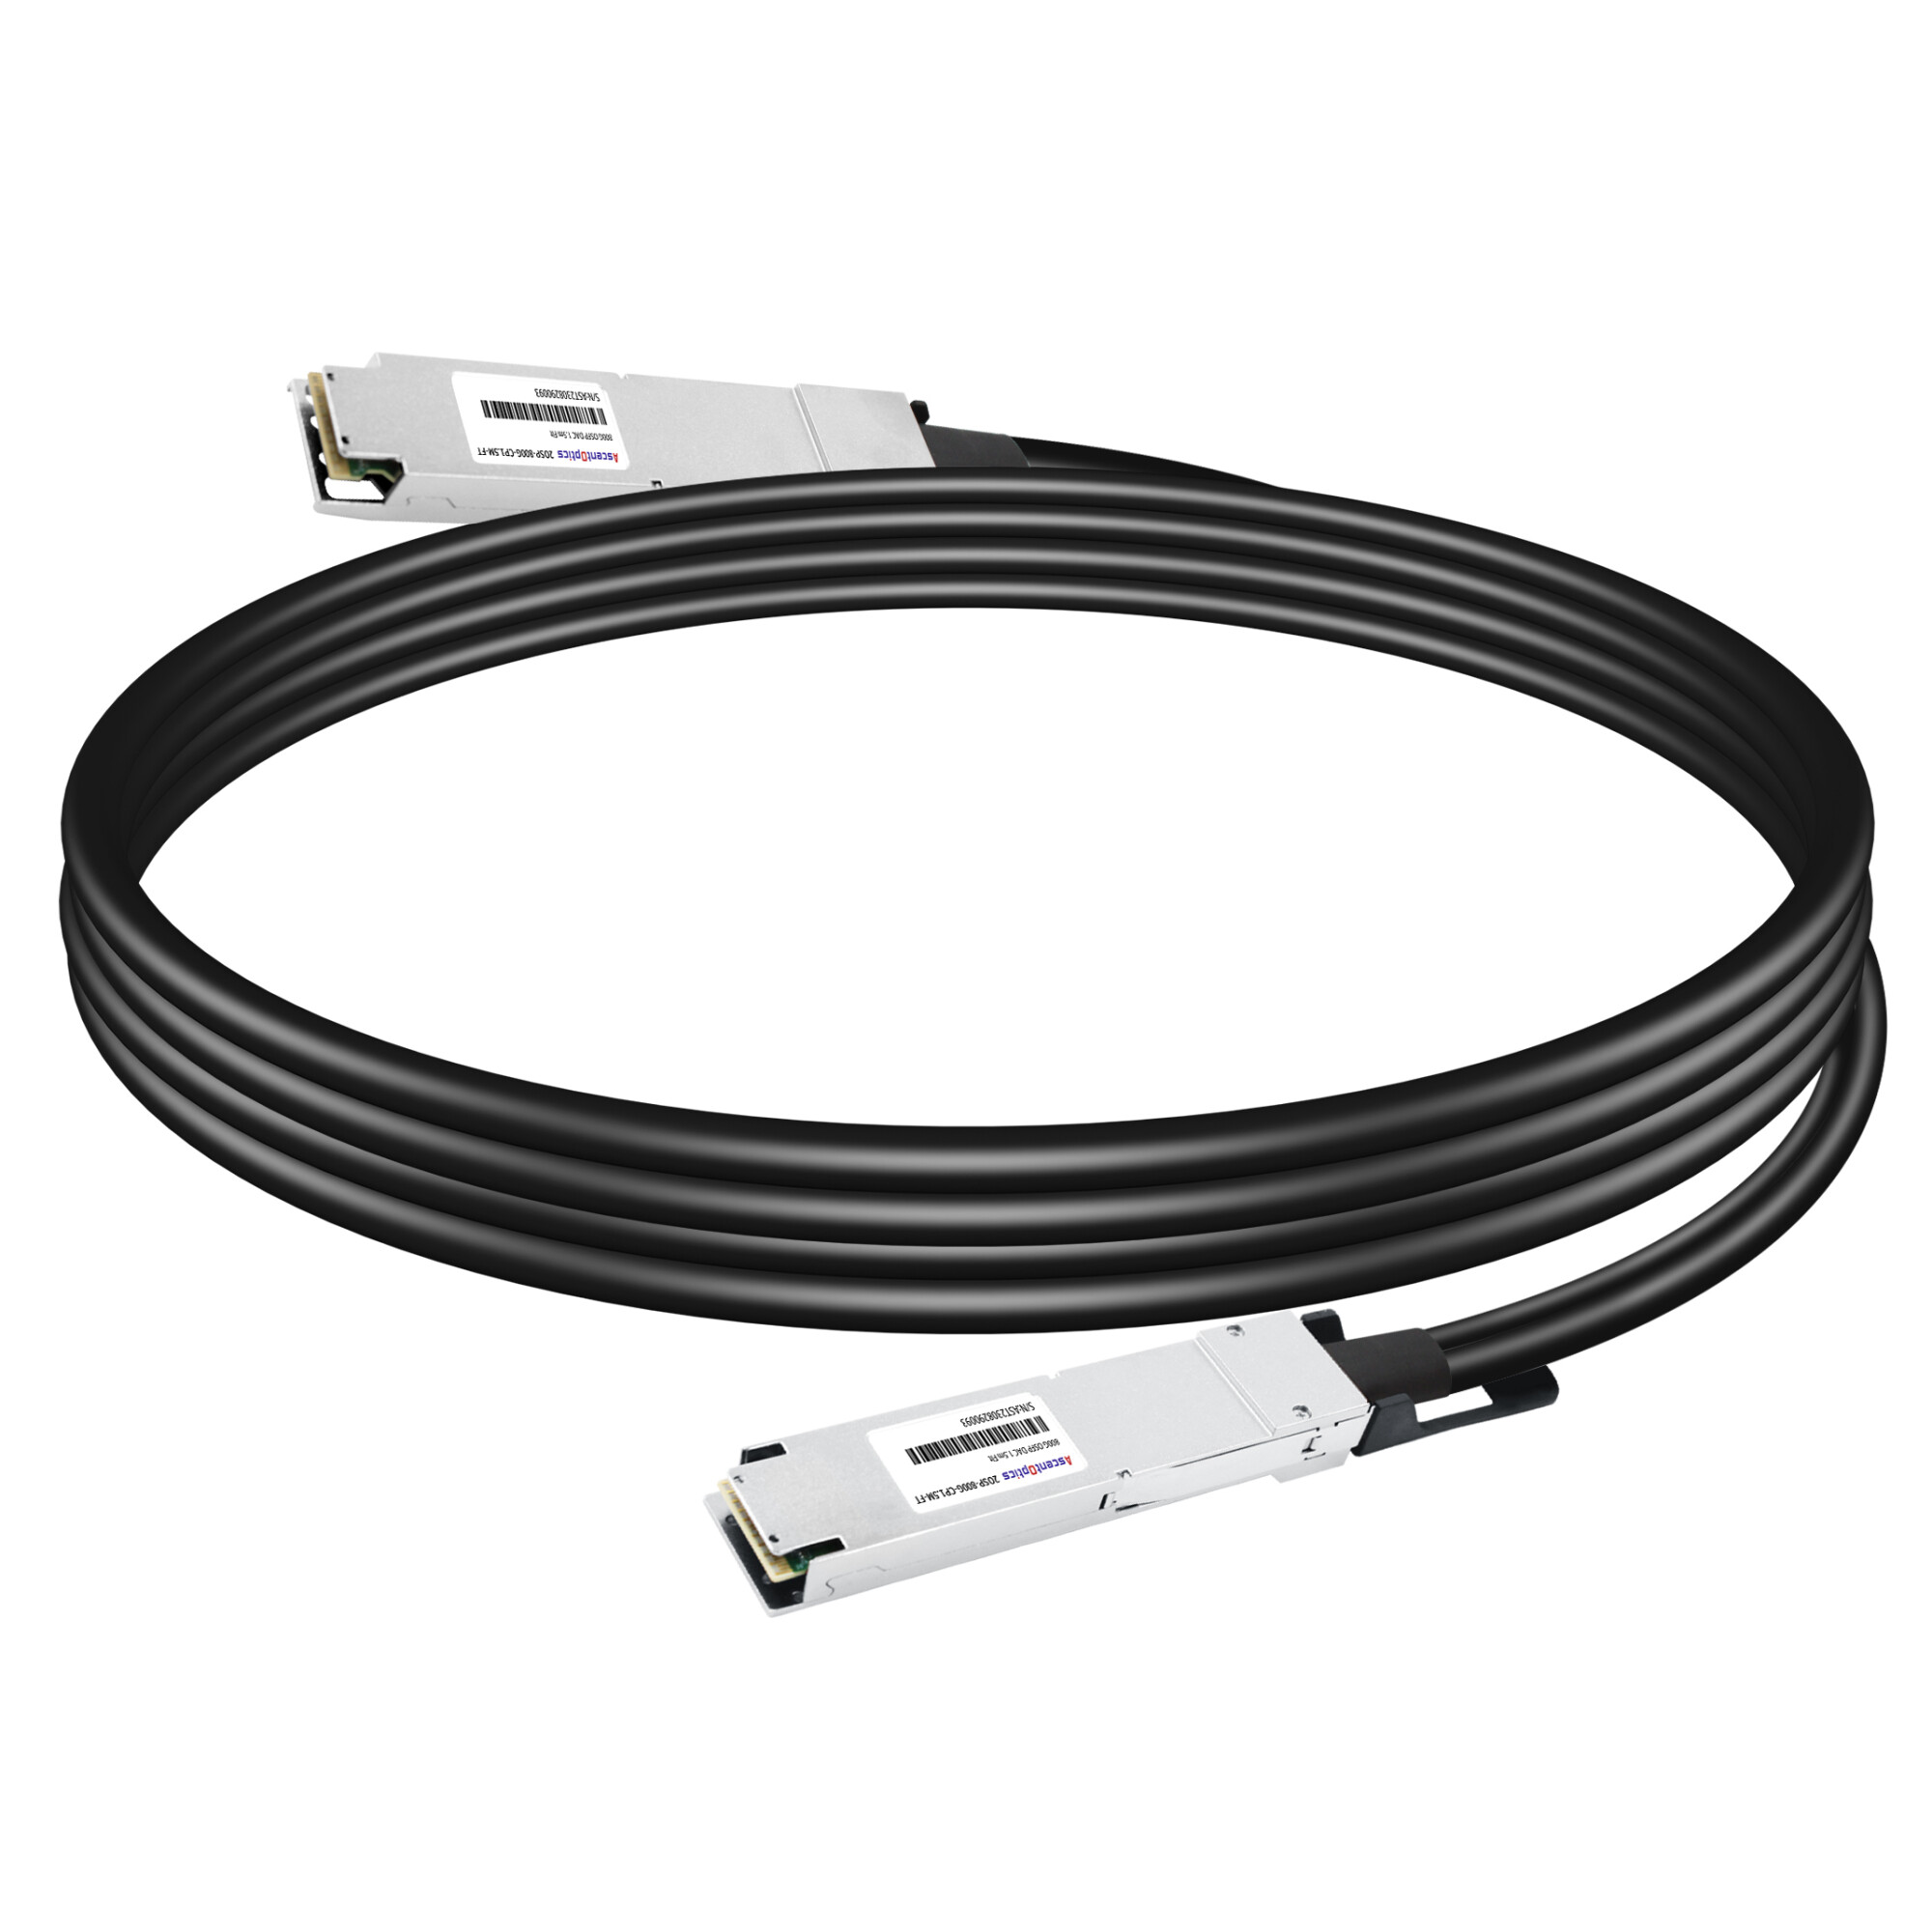 2x 400G OSFP to 2x 400G OSFP Copper Cable,1.5 Meter Flat Top